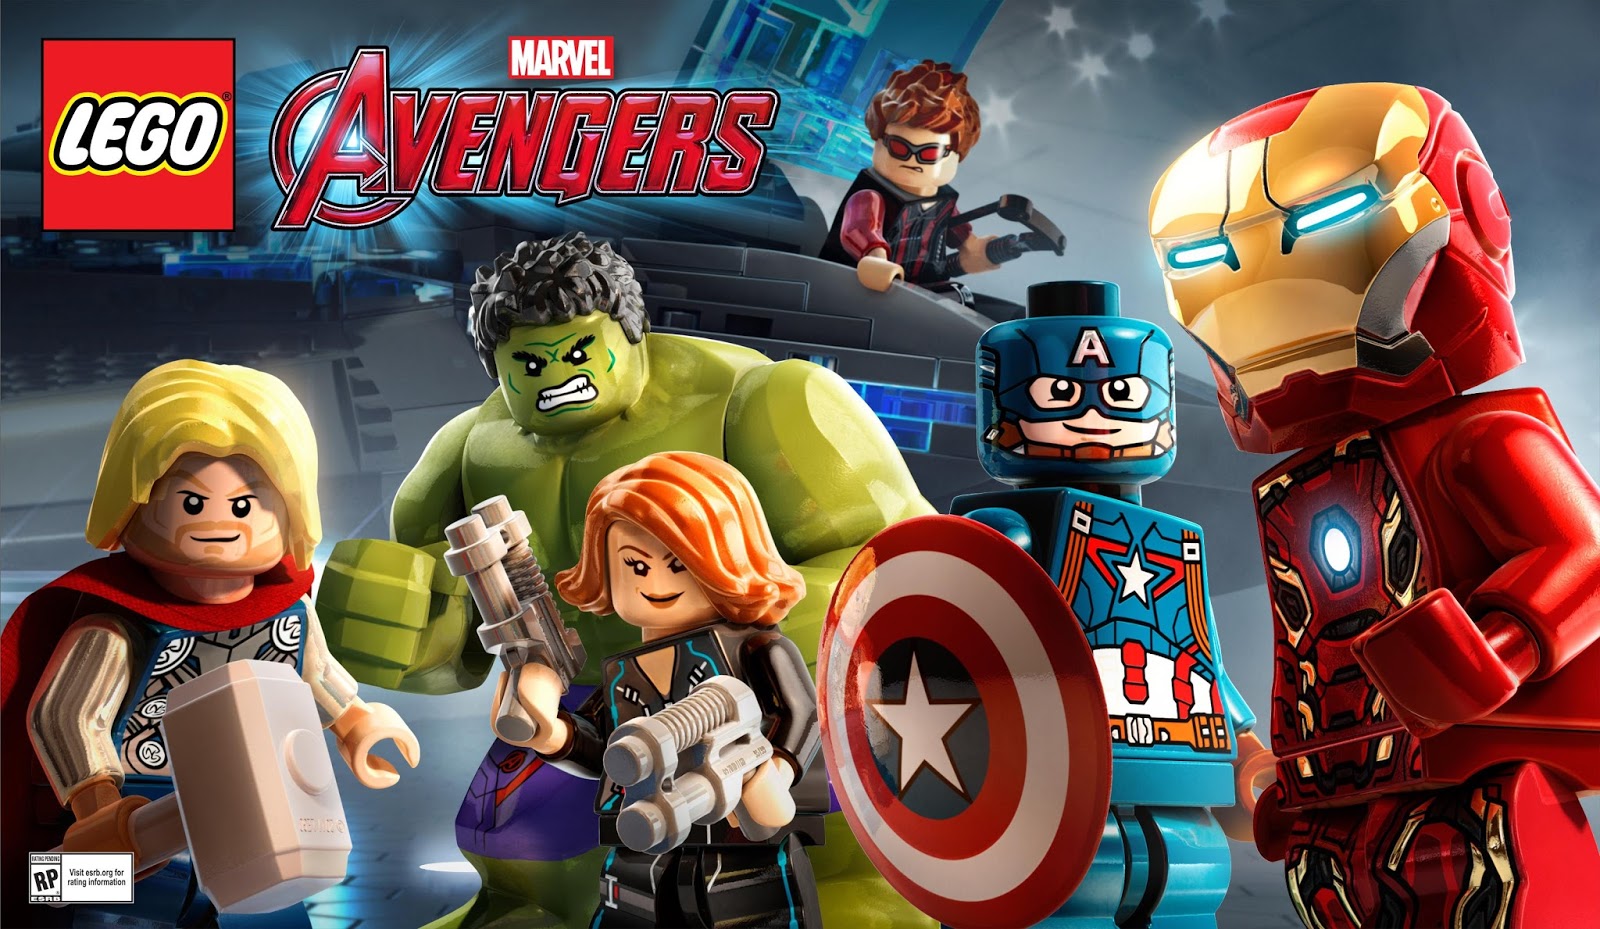 Marvel Avengers Assemble: Assembly Required